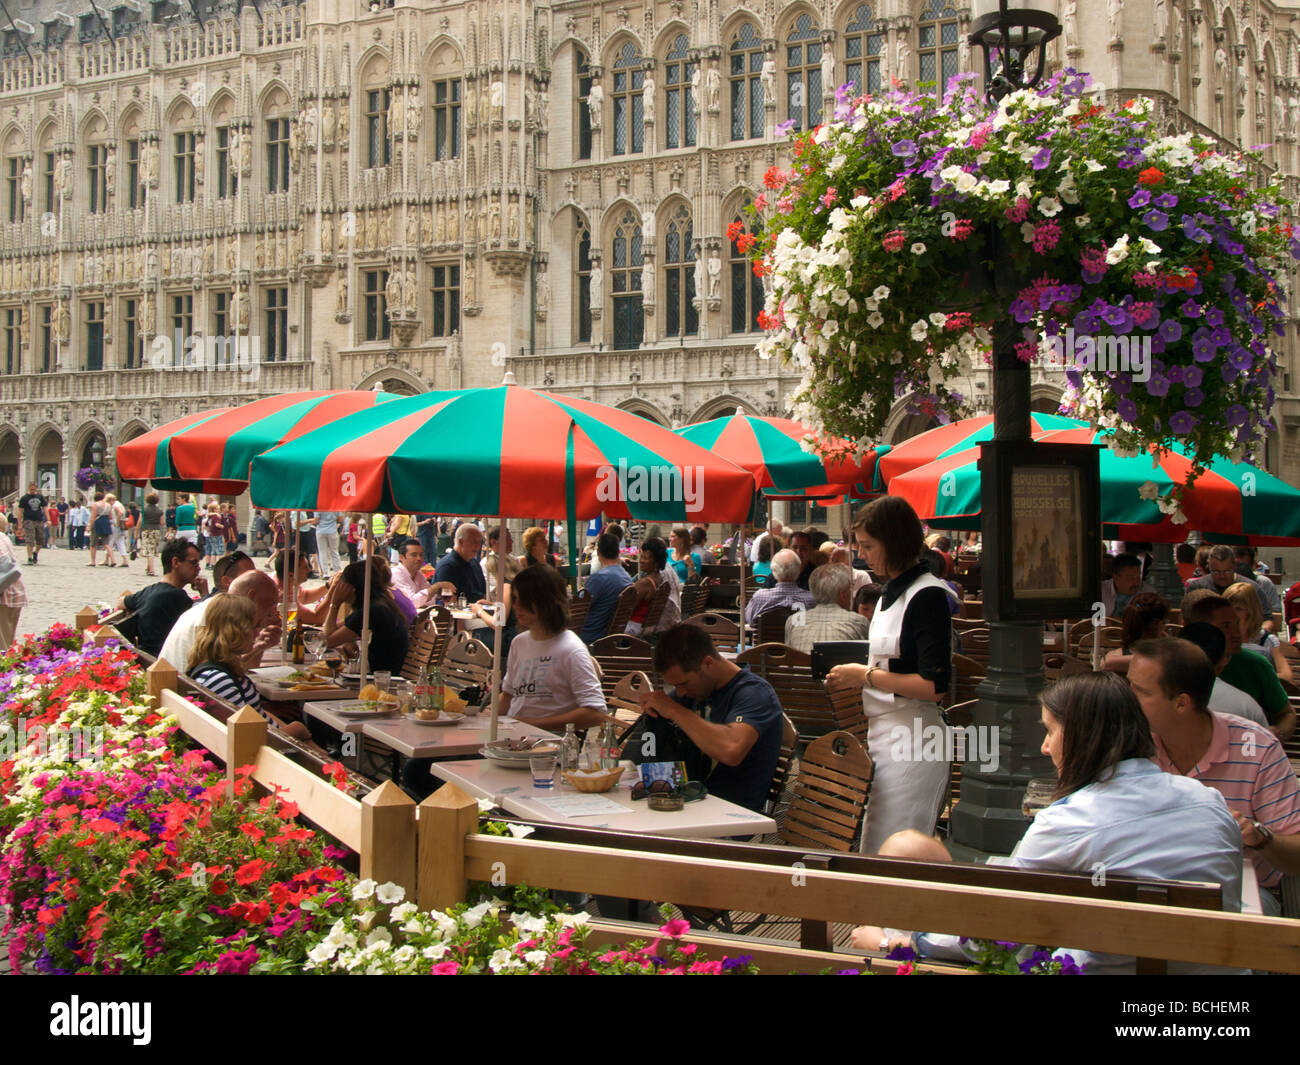 people having a drink and enjoying the 17th century scenery on the Grote Markt main square in Brussels Belgium Stock Photo